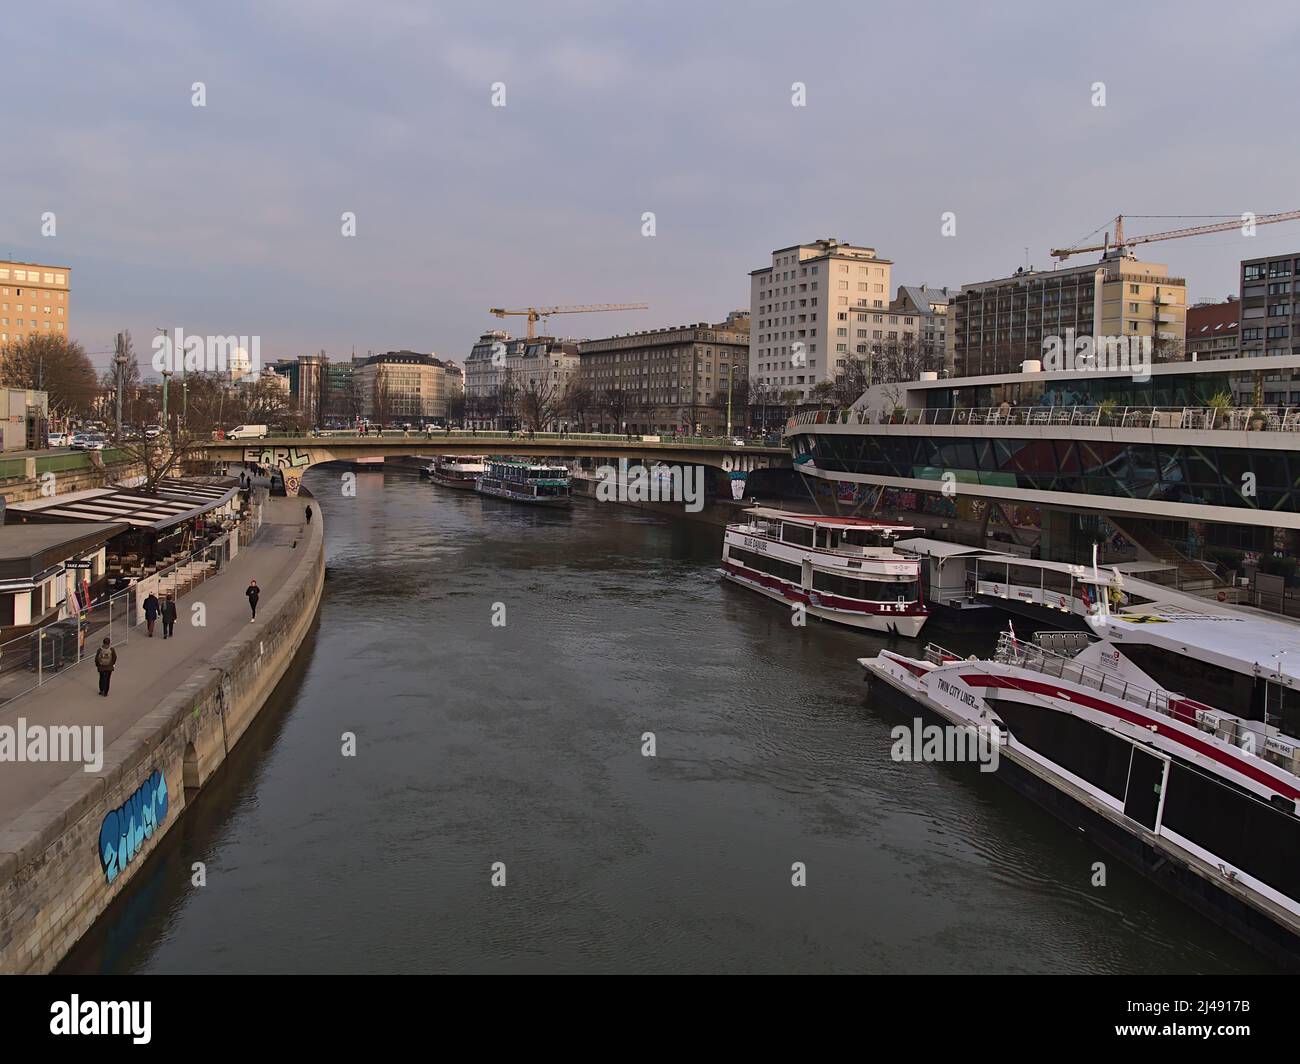 Beautiful view over the Donaukanal (Danube Canal) in the downtown of Vienna, Austria with docking boats on the shore surrounded by buildings. Stock Photo